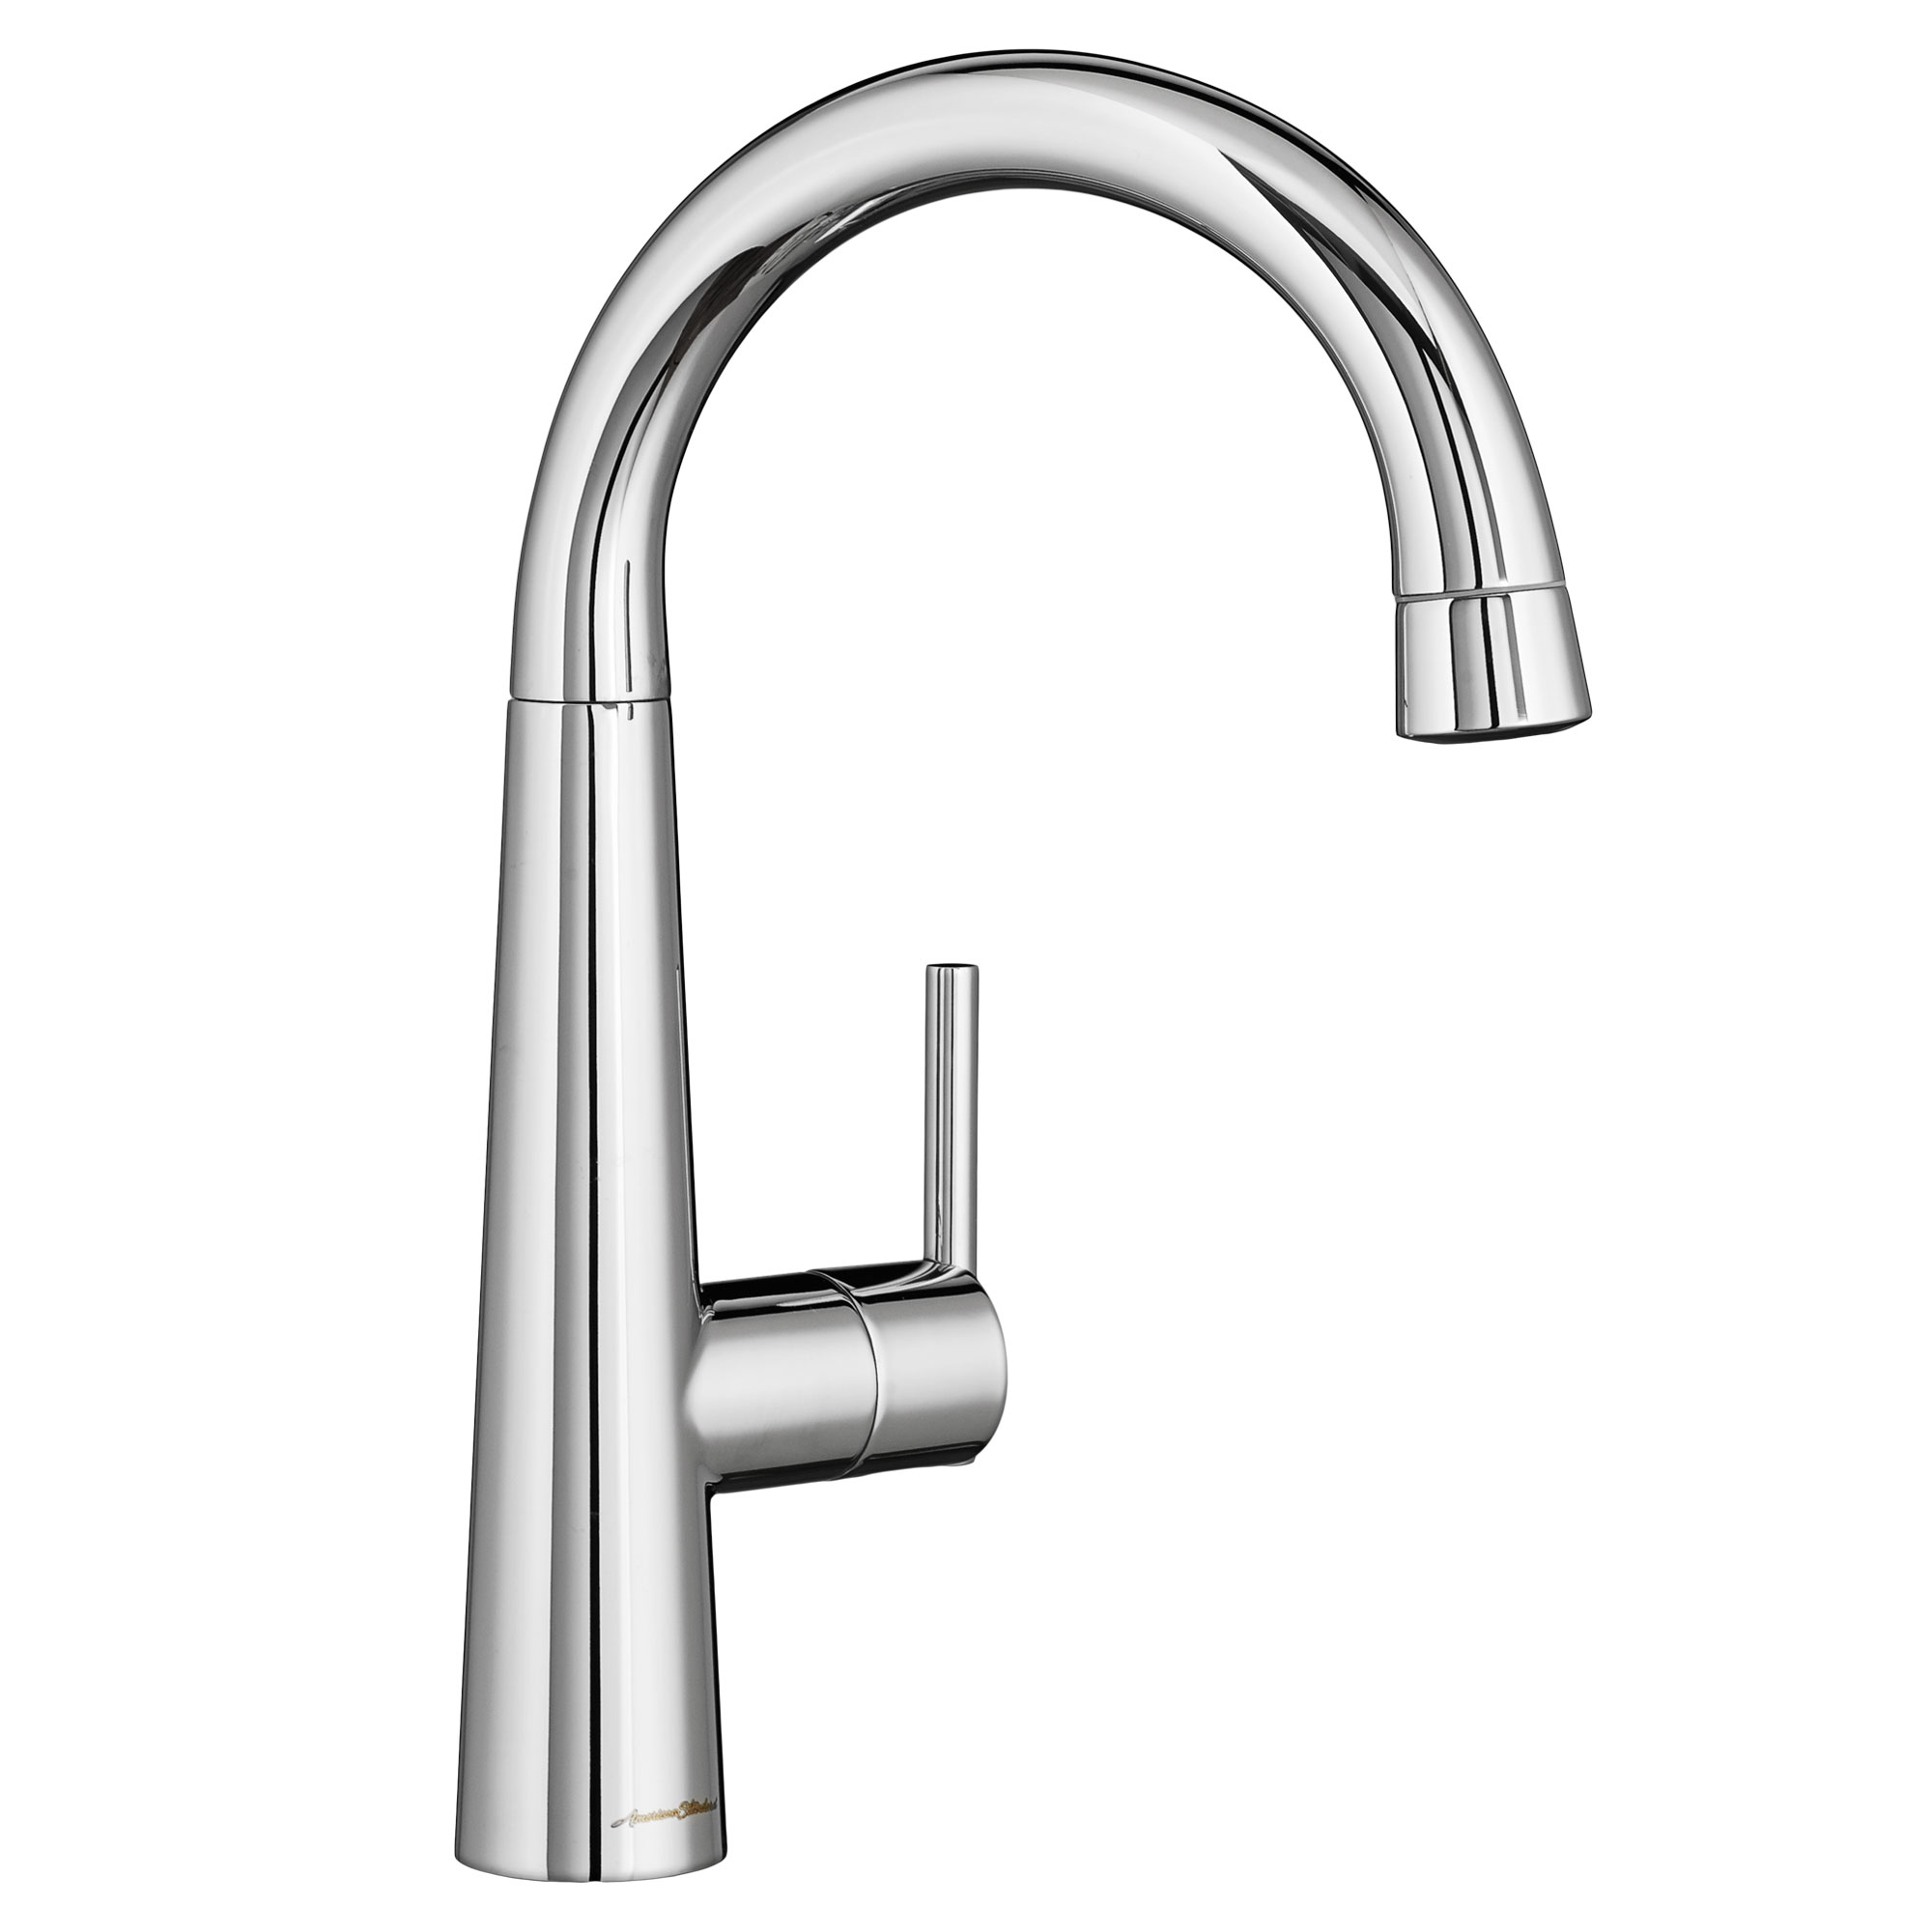 Edgewater Single Handle Pull-Down Spray Bar Faucet in Polished Chrome